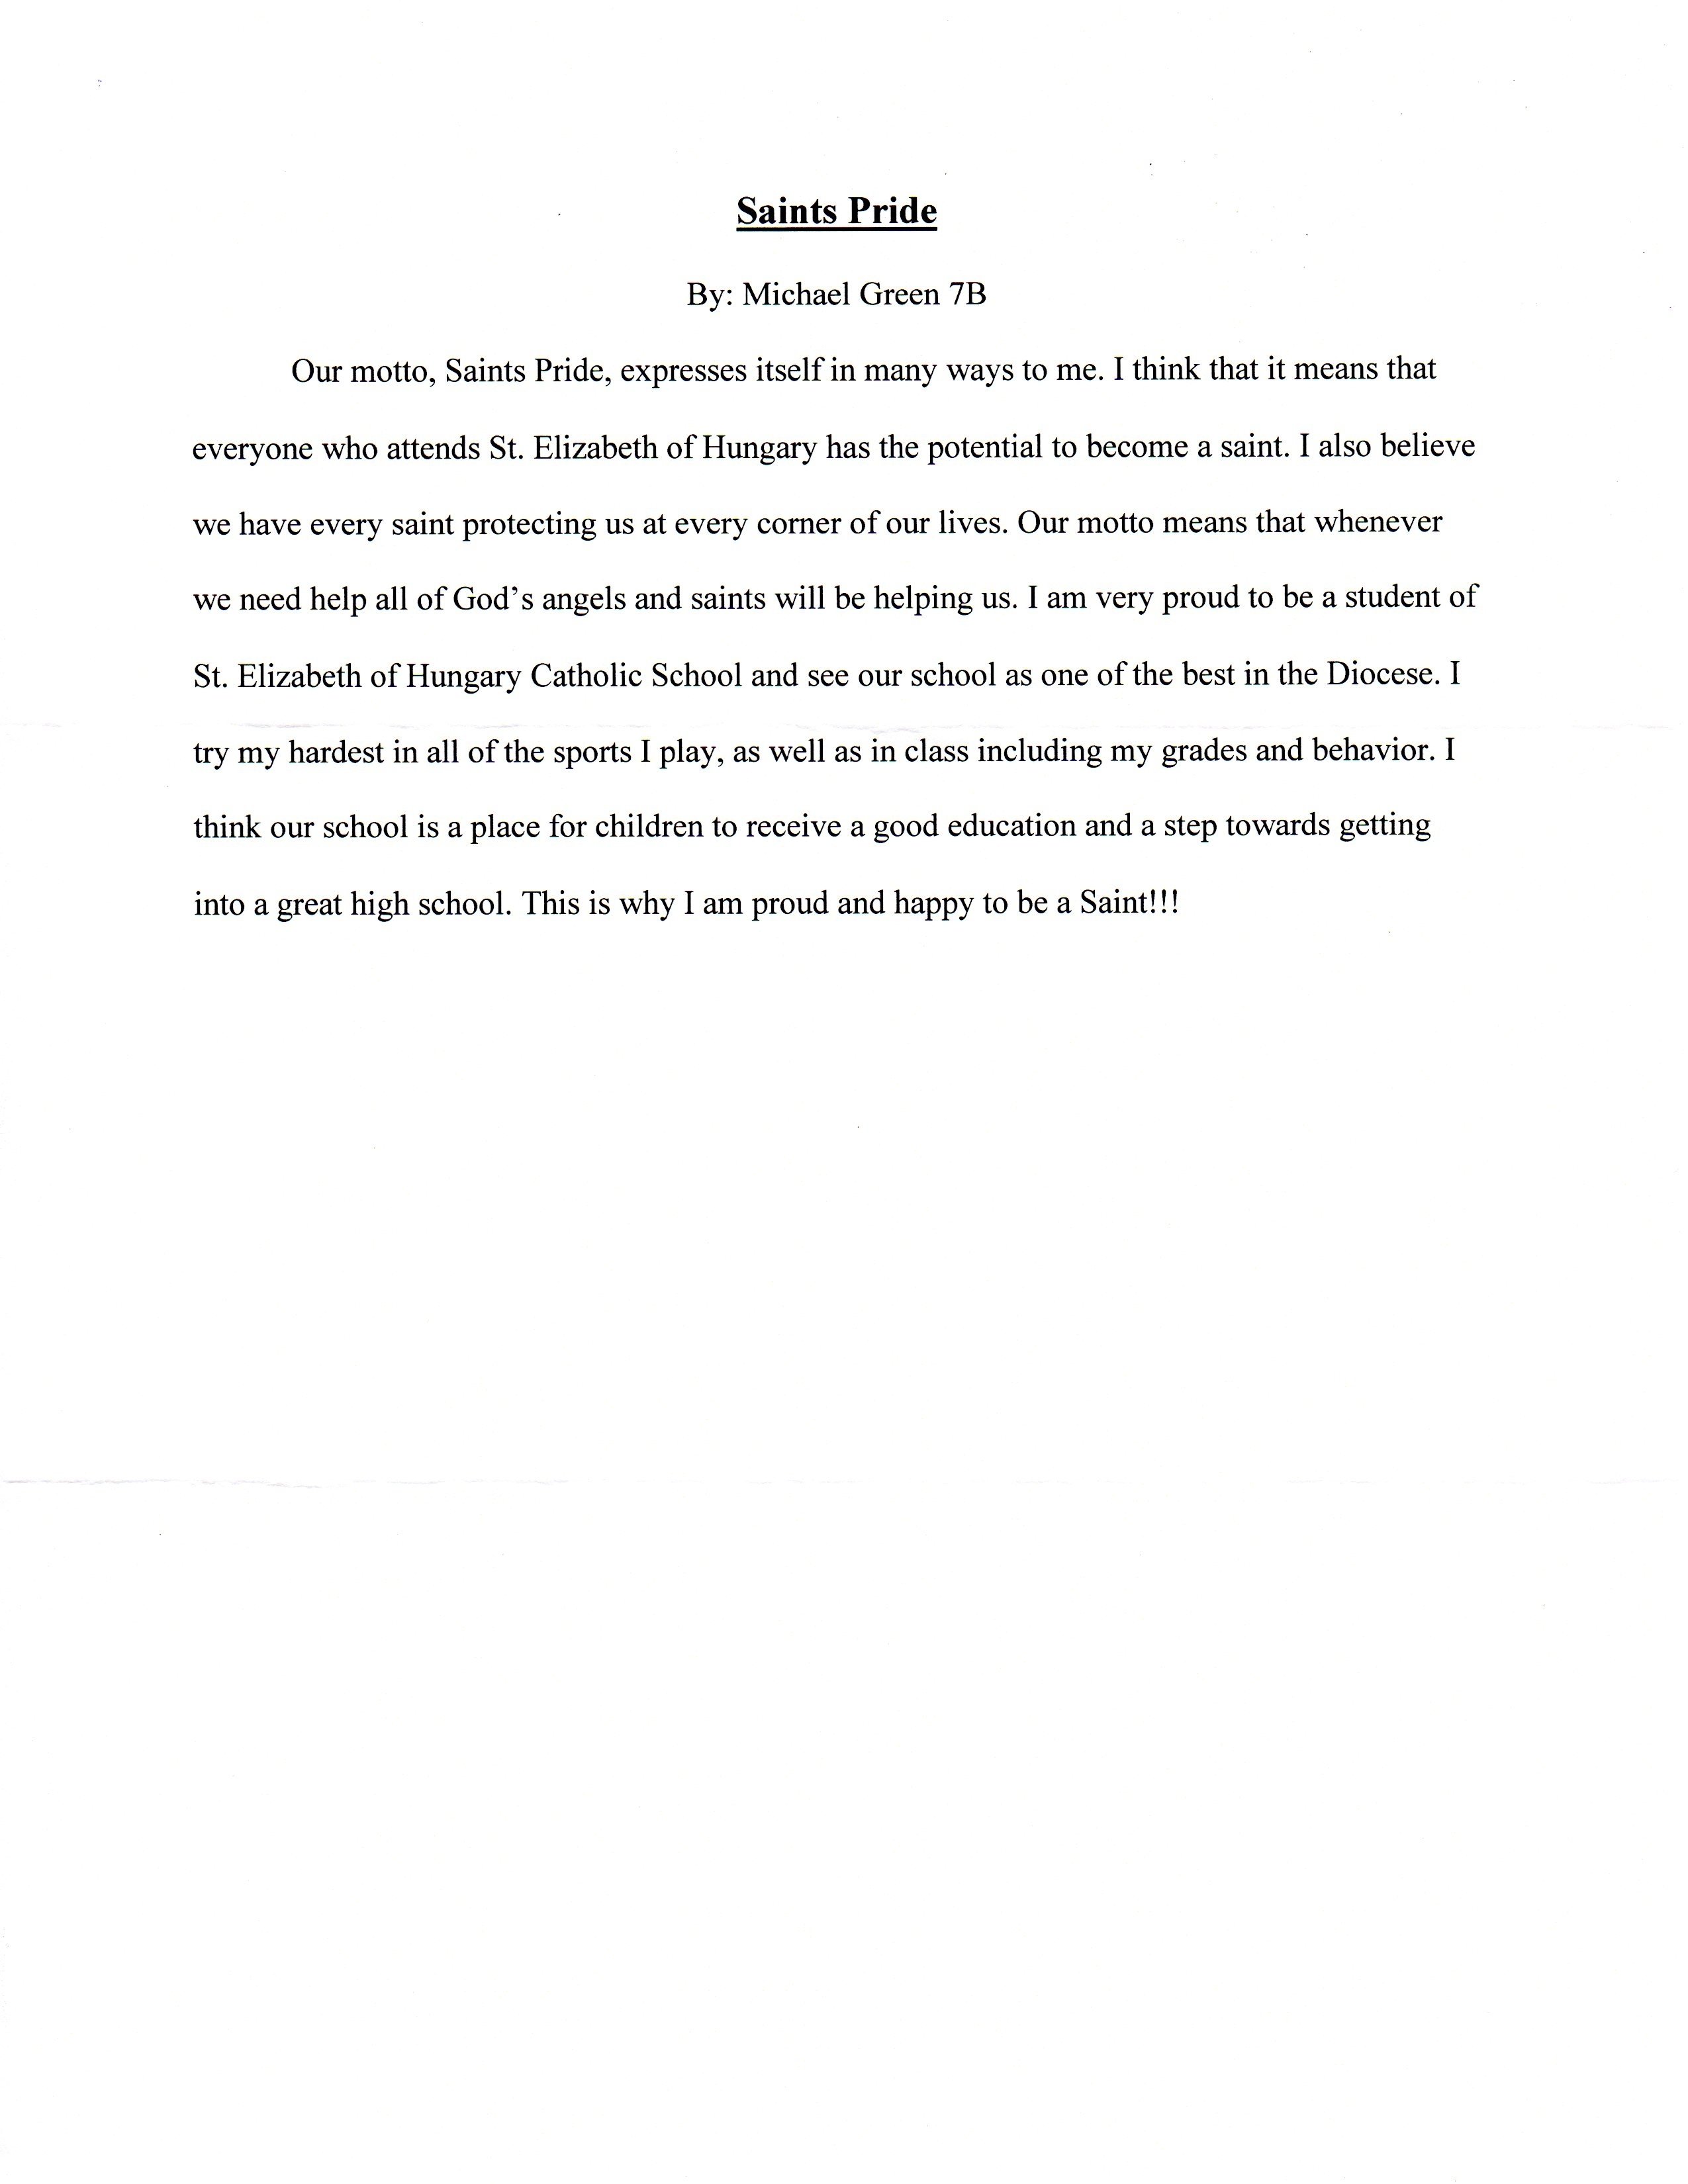 10 Fantastic Ideas For Student Council Speeches essay about student discuss write good essays essay about student 2023